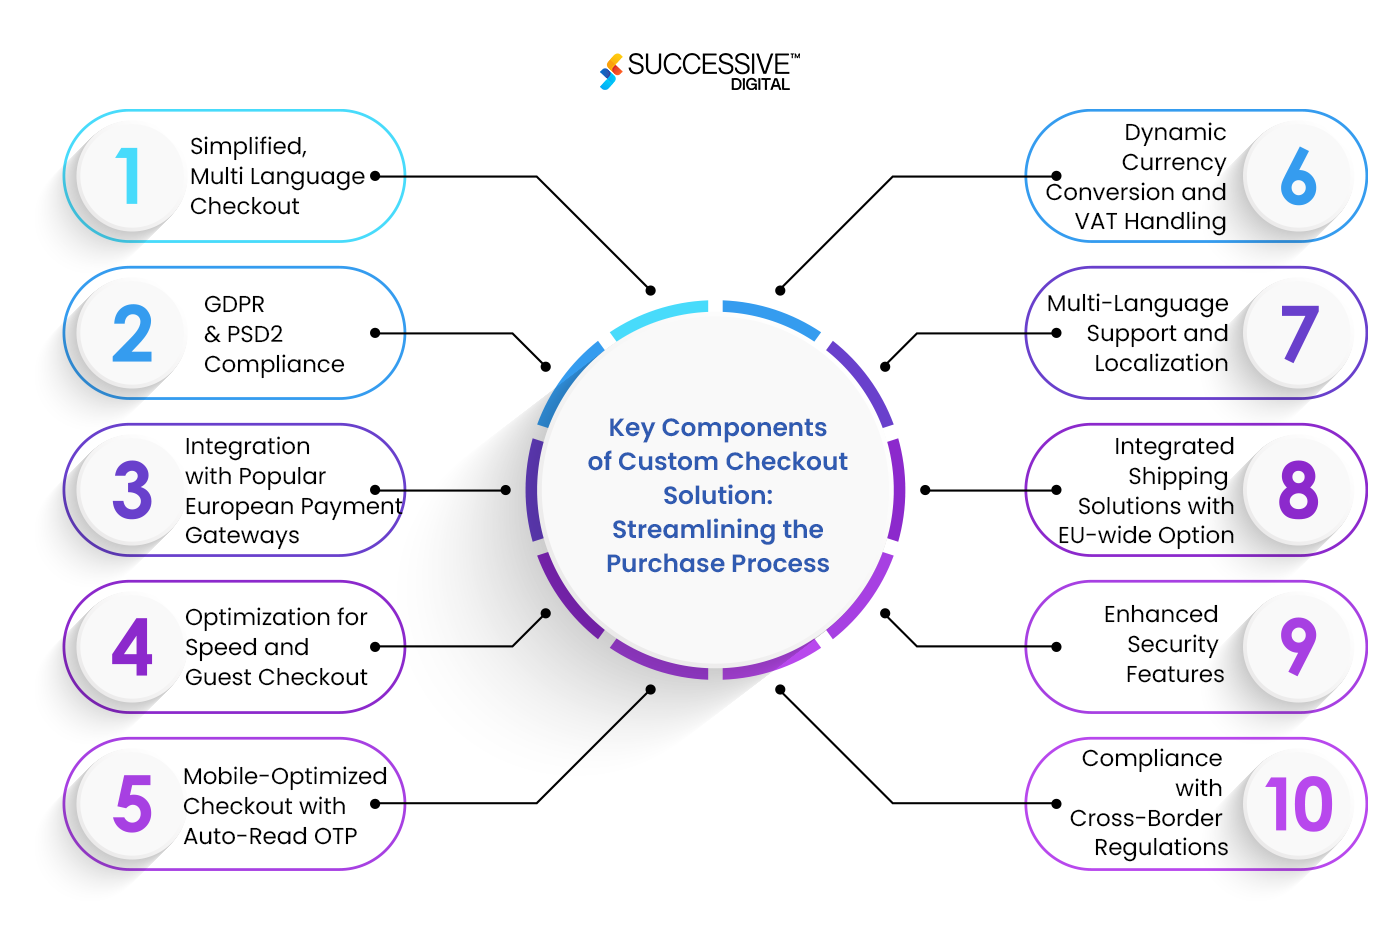 Key Components of the Custom Checkout Solution to Streamline the Purchase Process